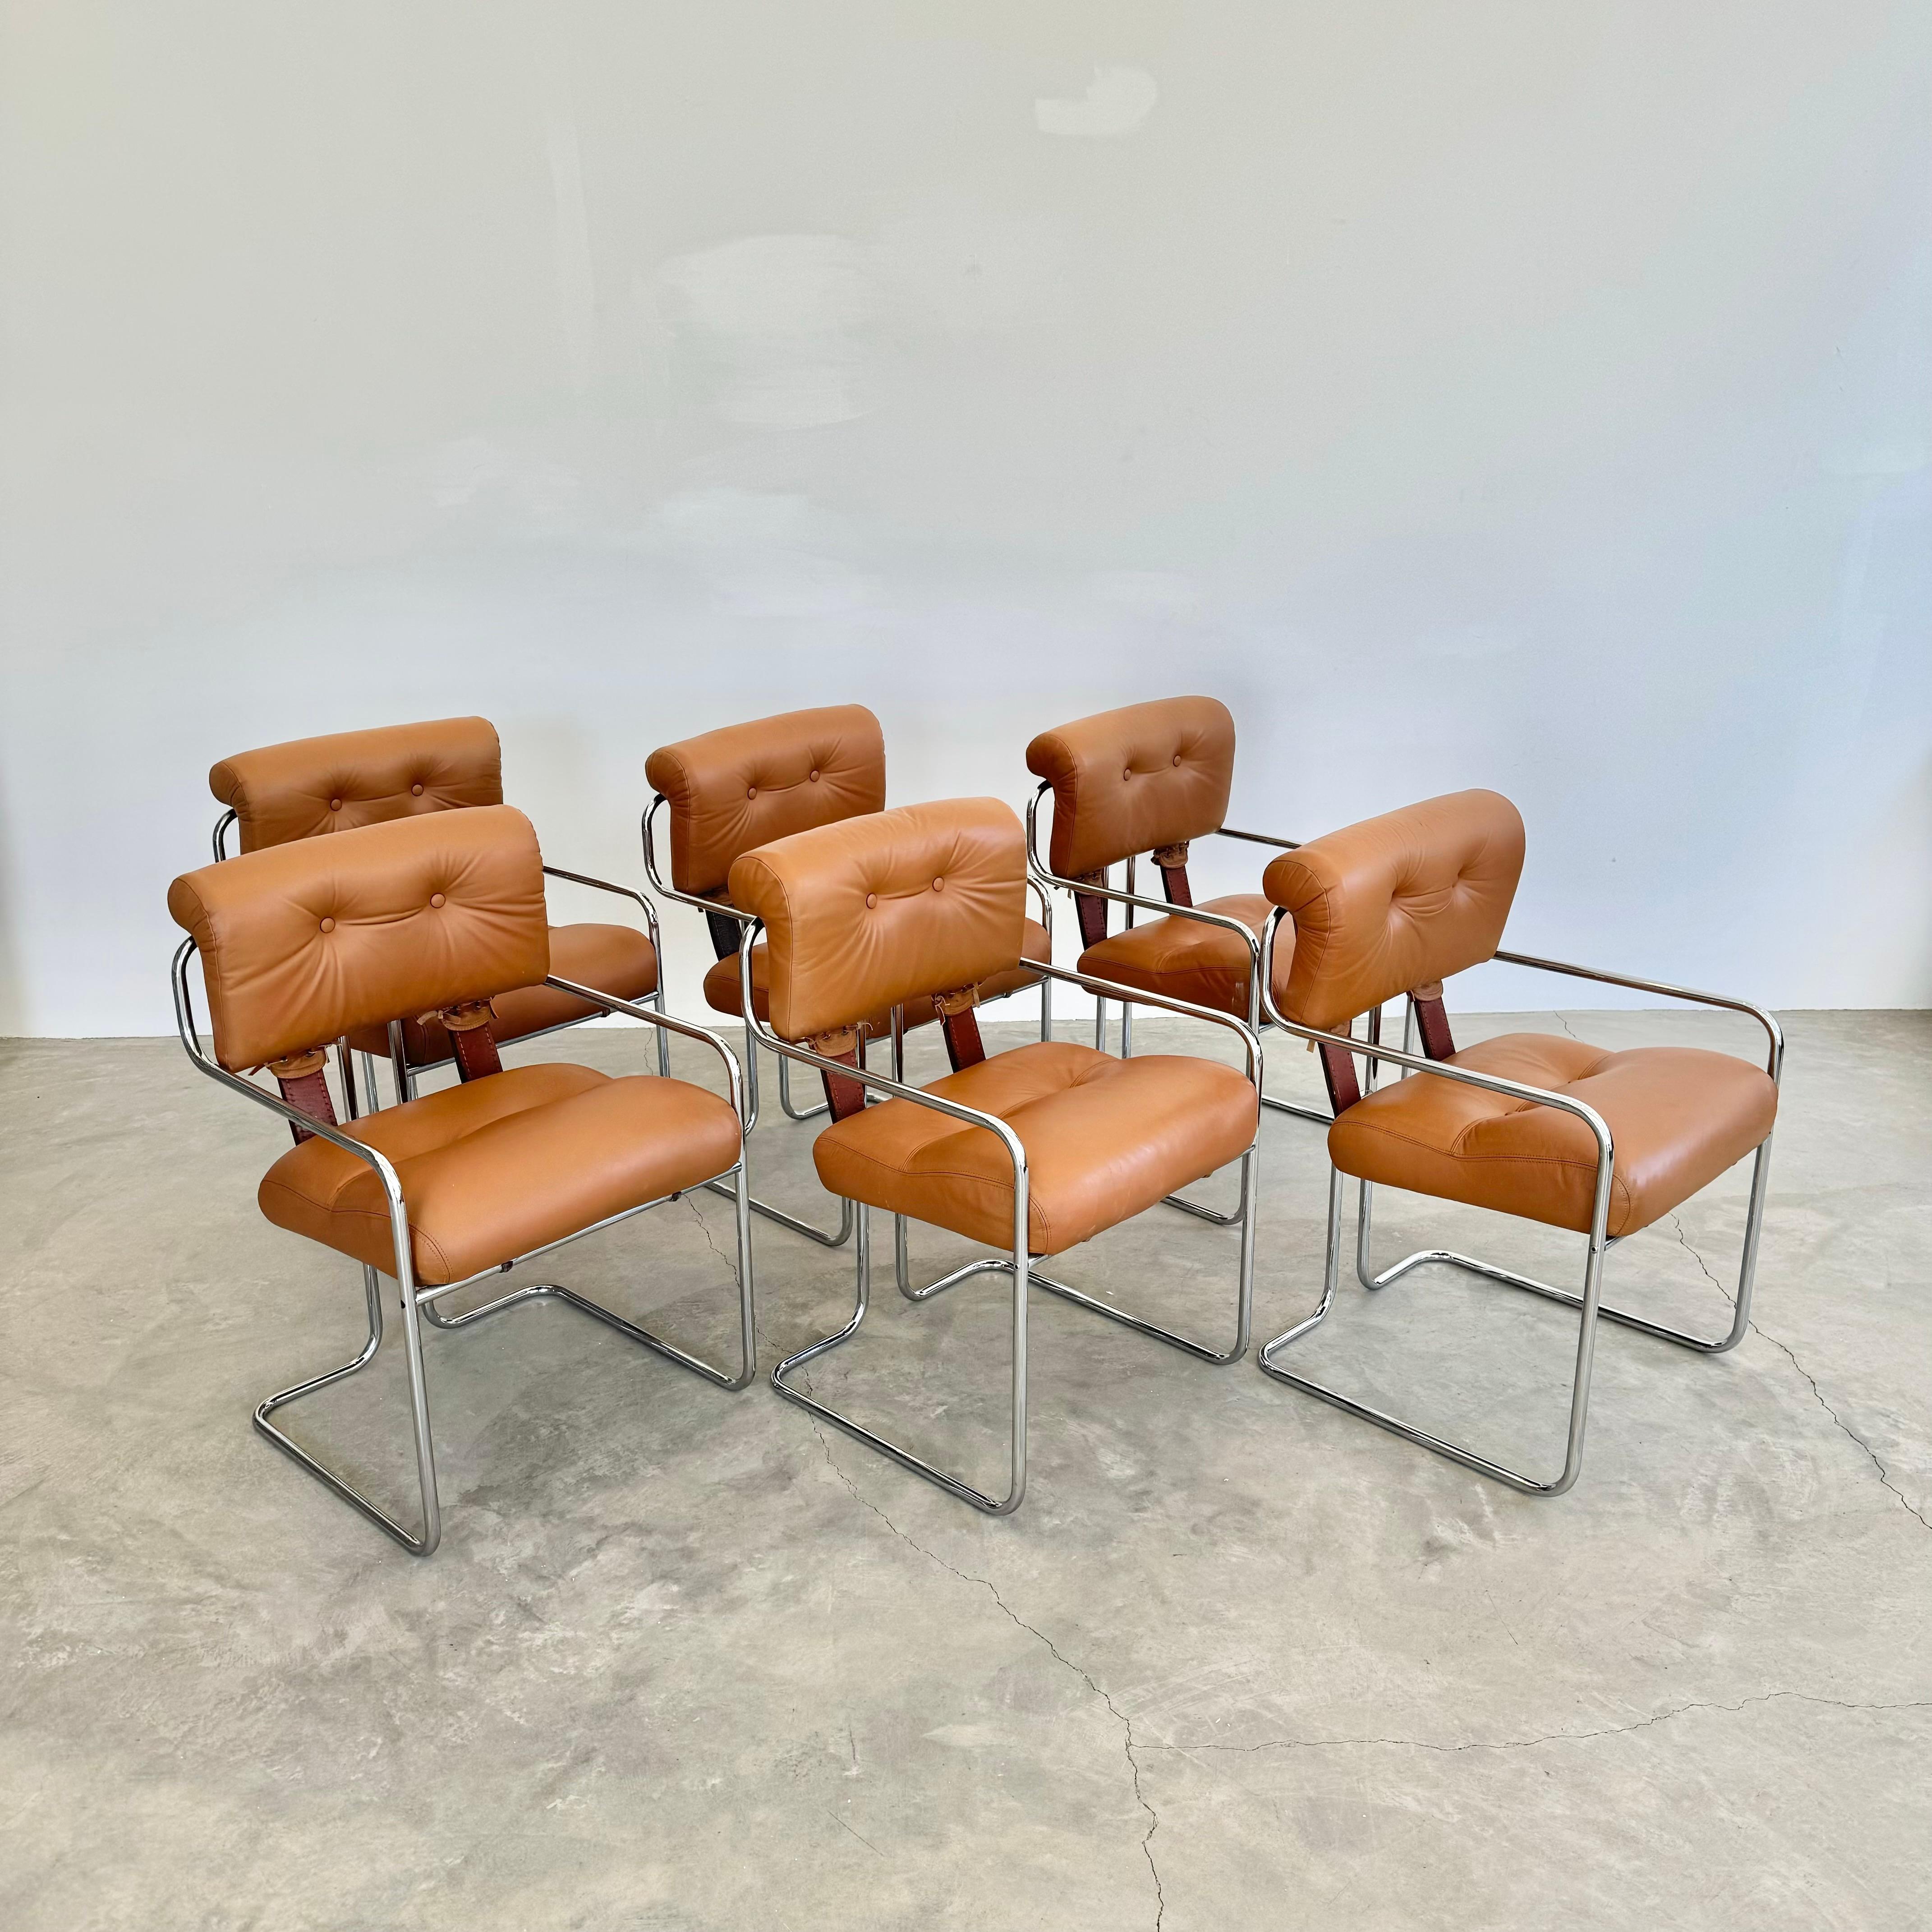 Set of 6 'Tucroma' Chairs in Tan by Guido Faleschini, 1970s Italy In Good Condition For Sale In Los Angeles, CA